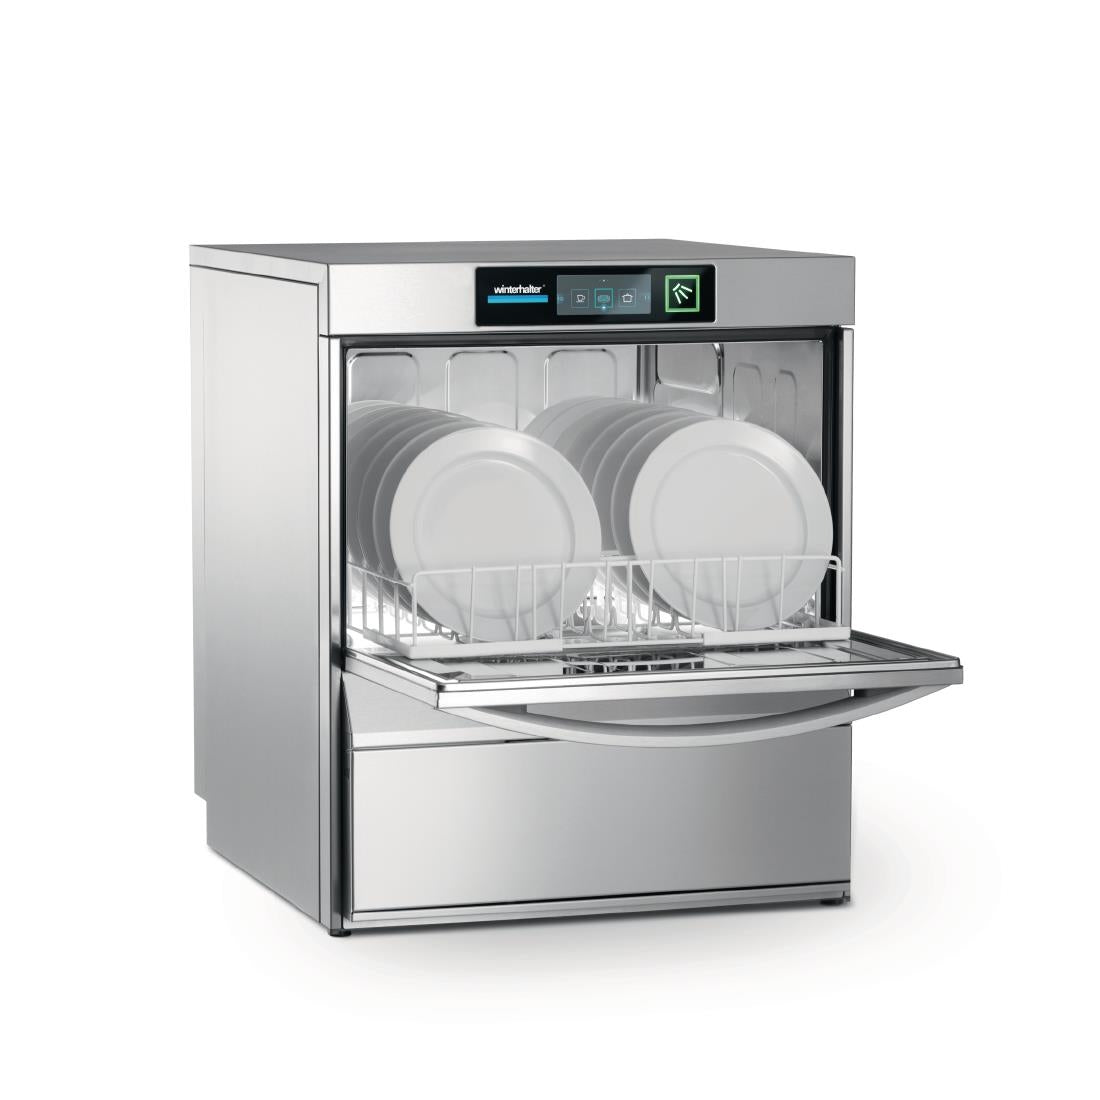 Winterhalter Undercounter Thermal Disinfection Dishwasher UC-M-E with Install